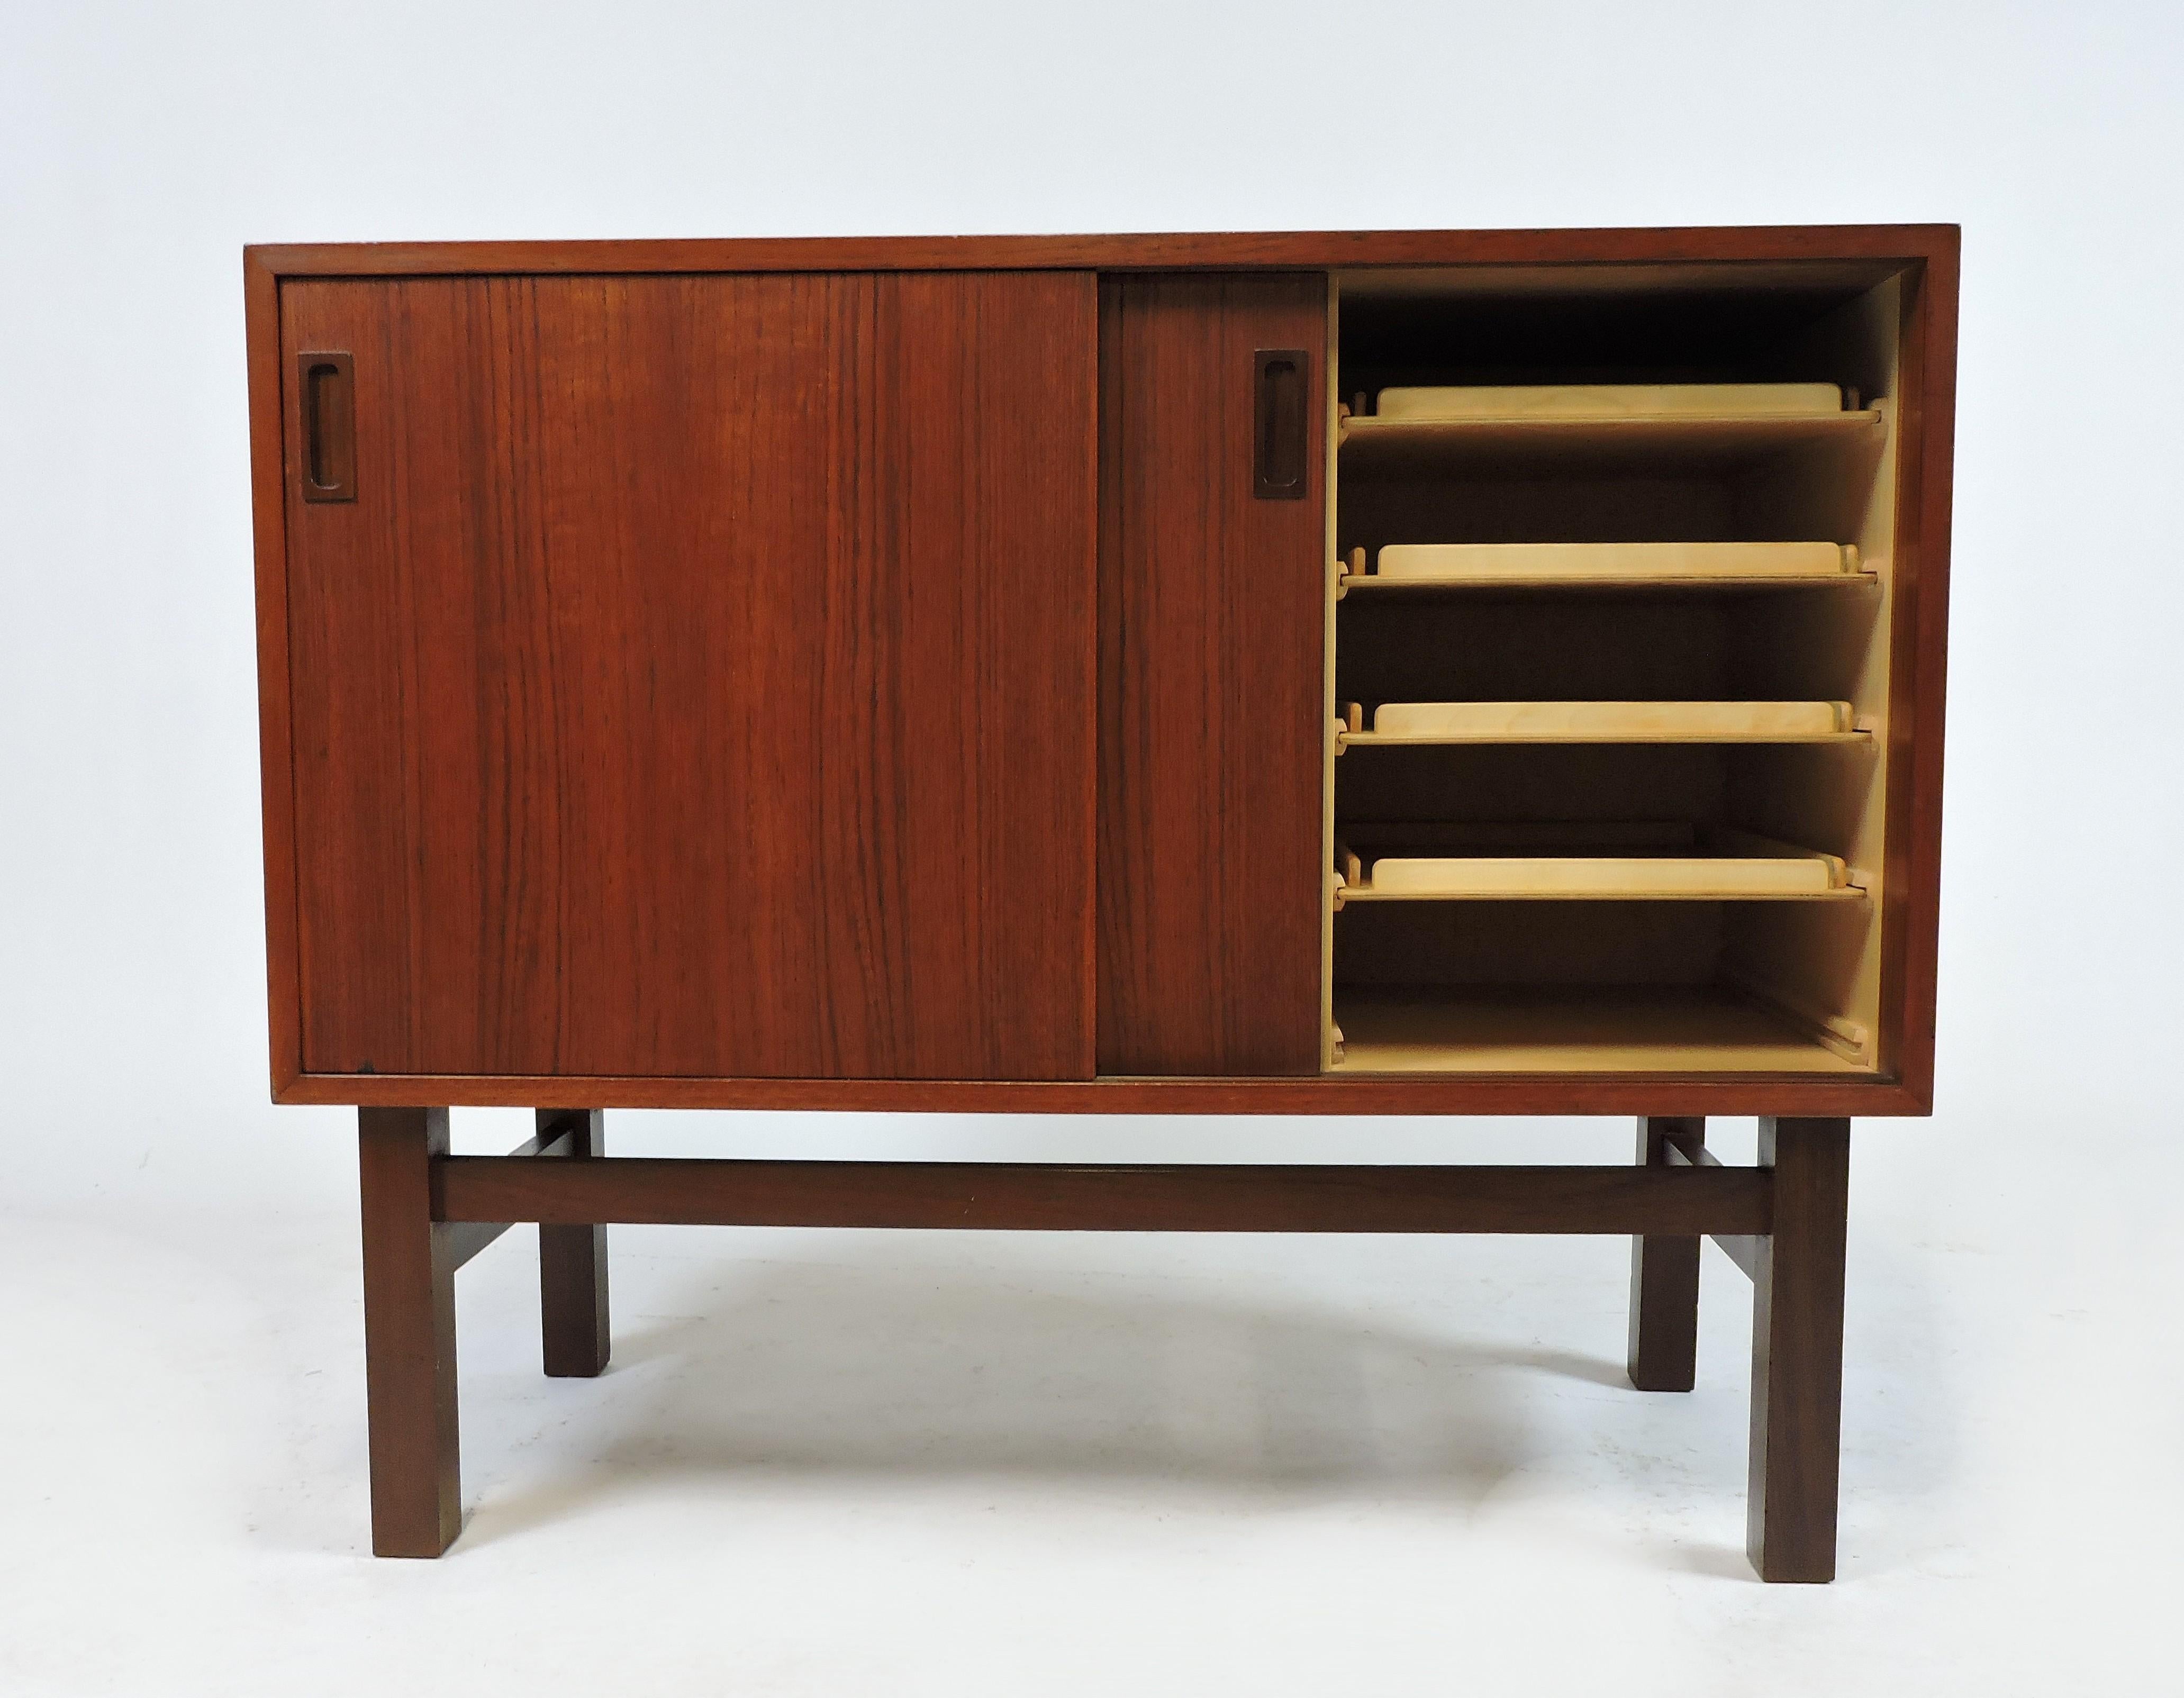 Handsome Danish teak and rosewood credenza from the 1960s. This credenza has storage space that includes 2 compartments with sliding doors. One compartment has an adjustable shelf, the other has 4 pullout / pull-out trays. For contrast, the pulls,